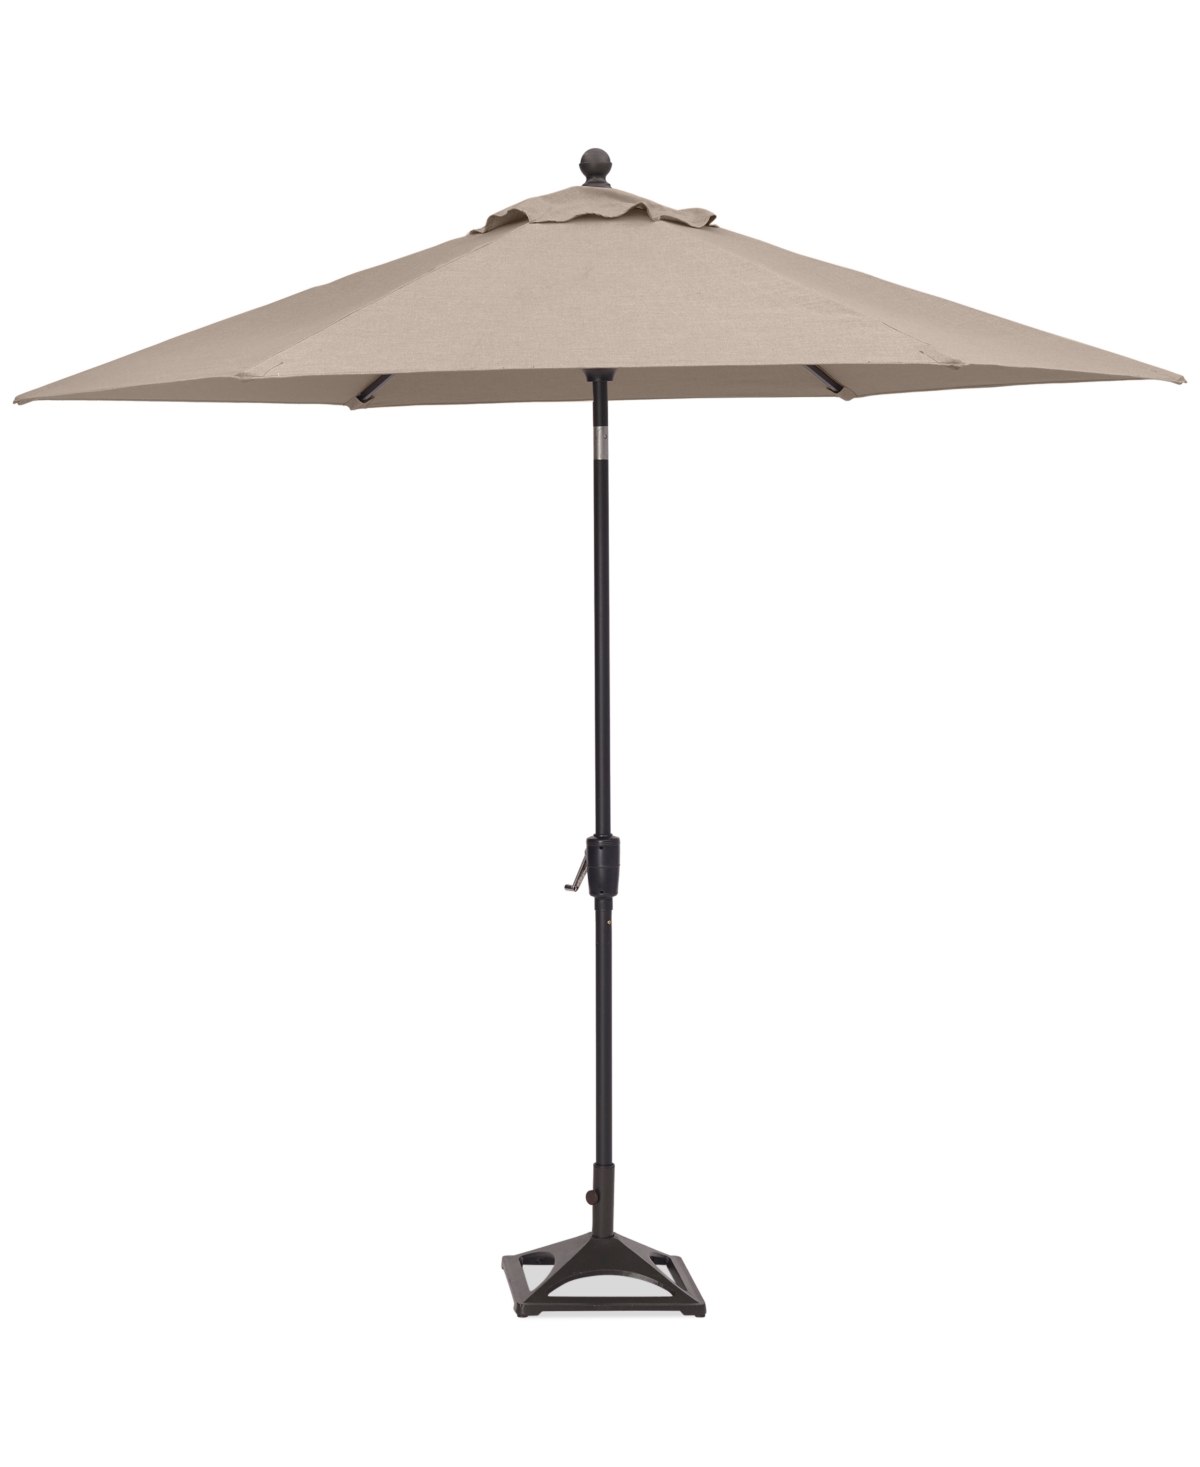 Stockholm Outdoor 9 Auto-Tilt Umbrella with Outdoor Fabric, Created for Macys